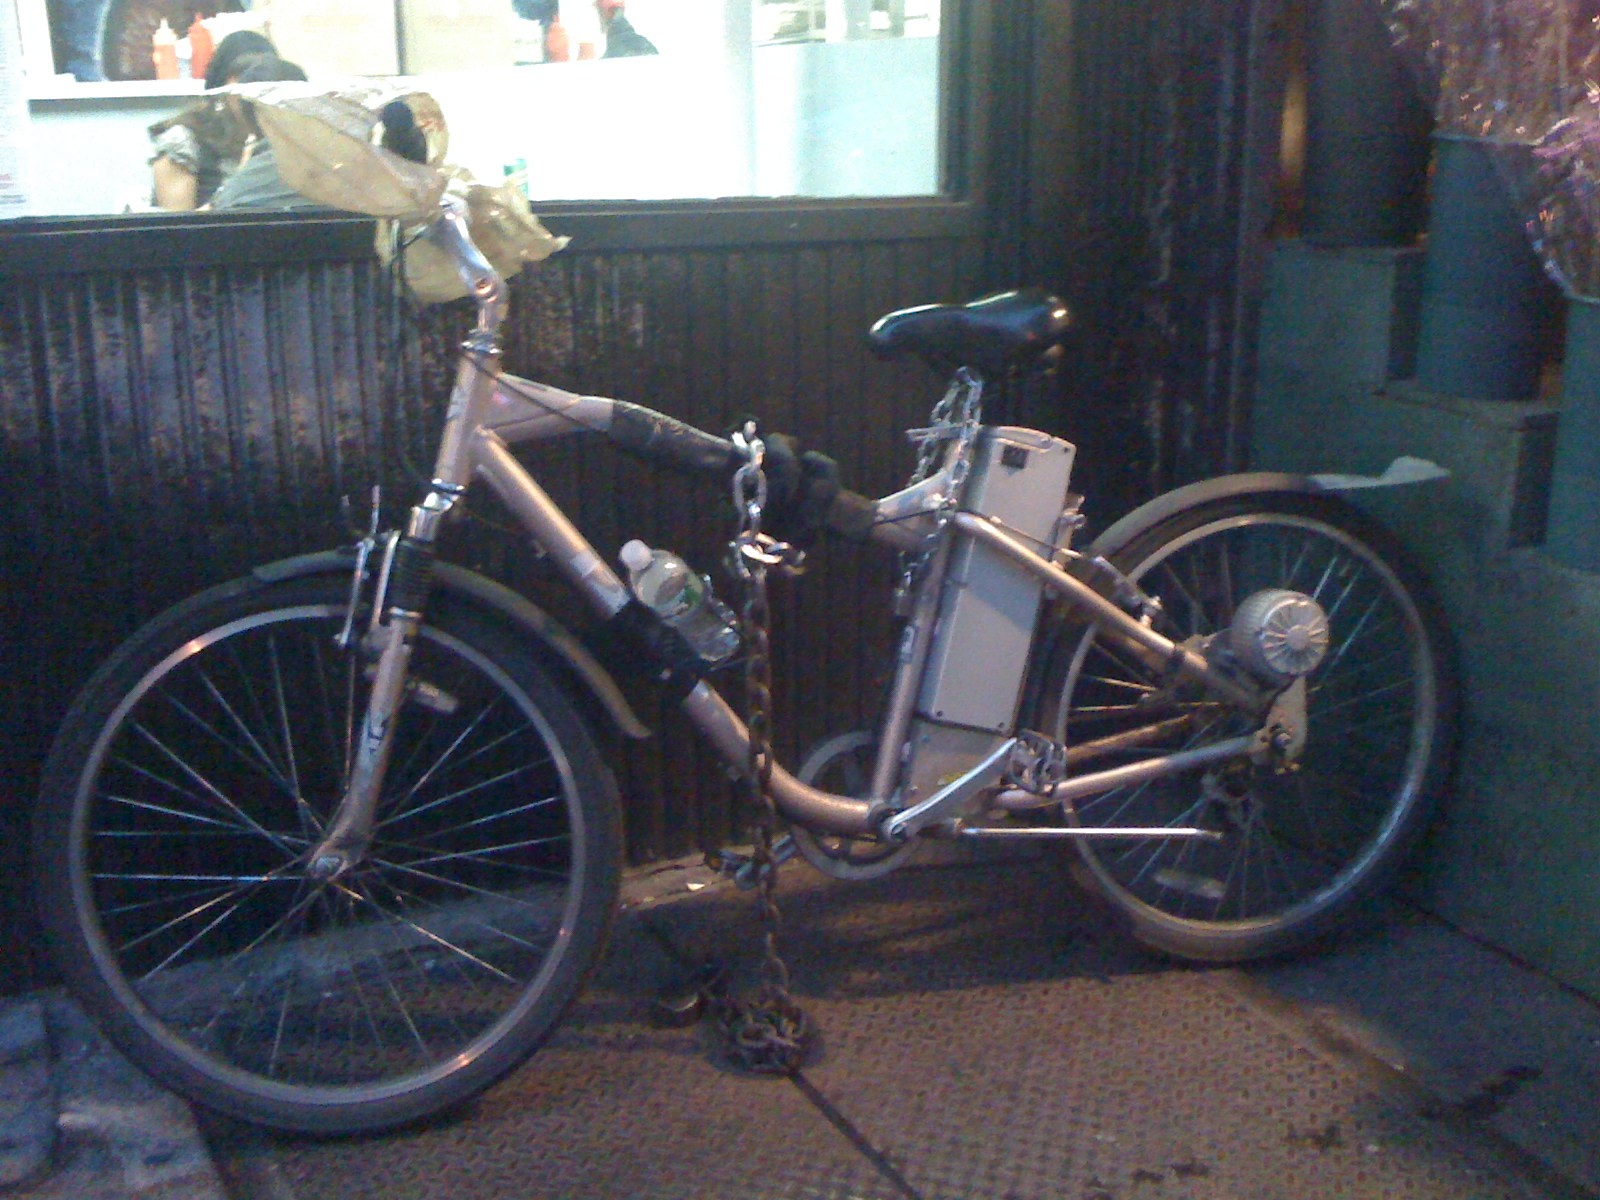 Bicycle used by a restaurant deliveryman in NYC